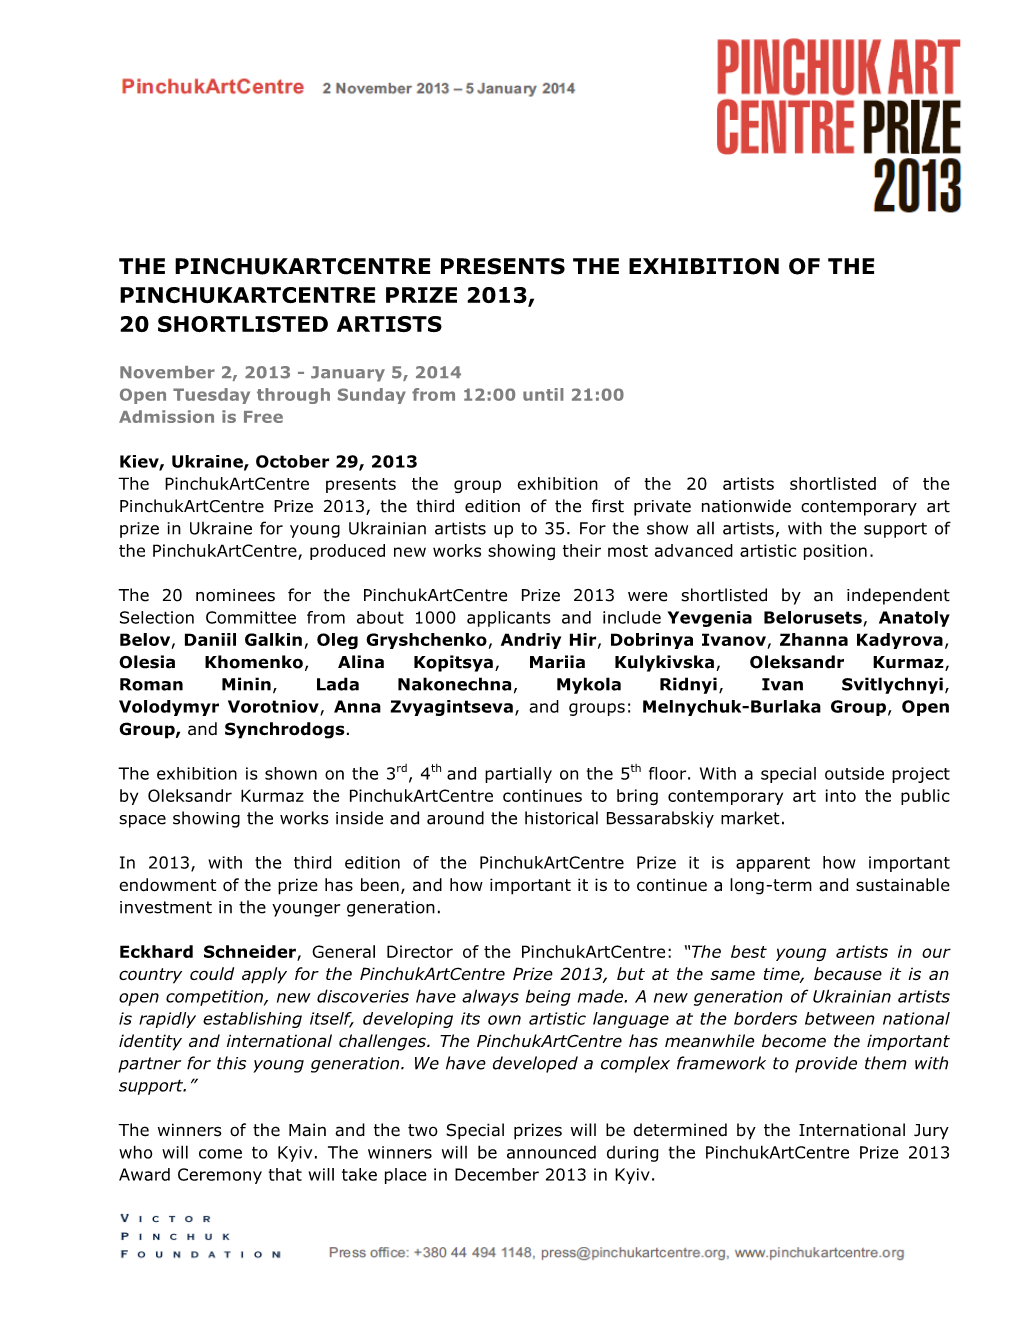 The Pinchukartcentre Presents the Exhibition of the Pinchukartcentre Prize 2013, 20 Shortlisted Artists